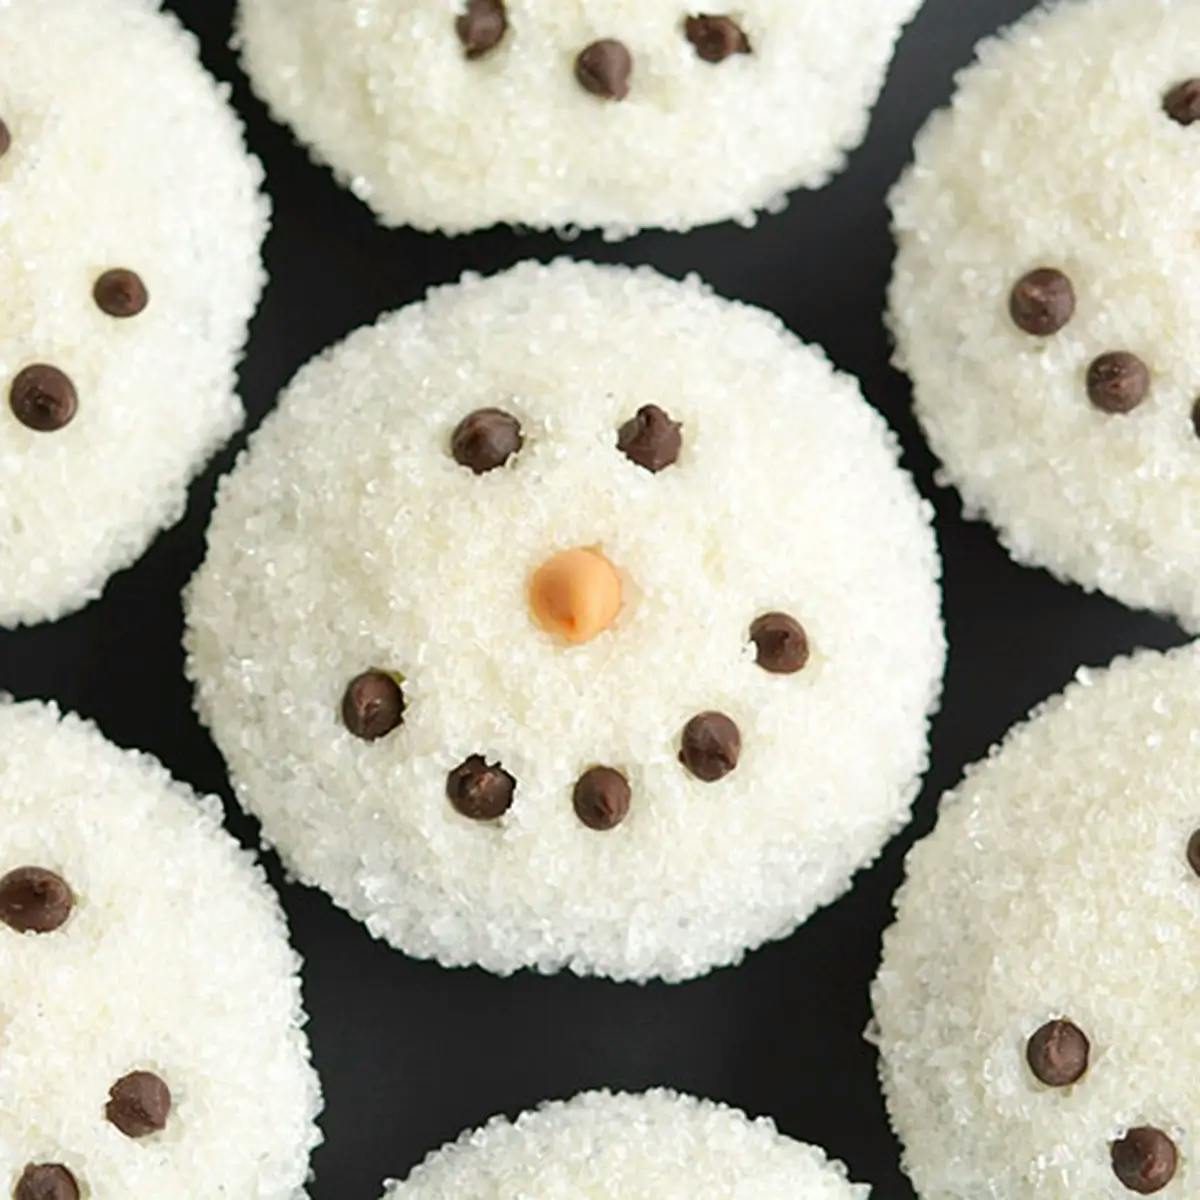 Sparkly snowman cupcake with white sugared frosting, brown dotted eyes and smile and an orange carrot nose.